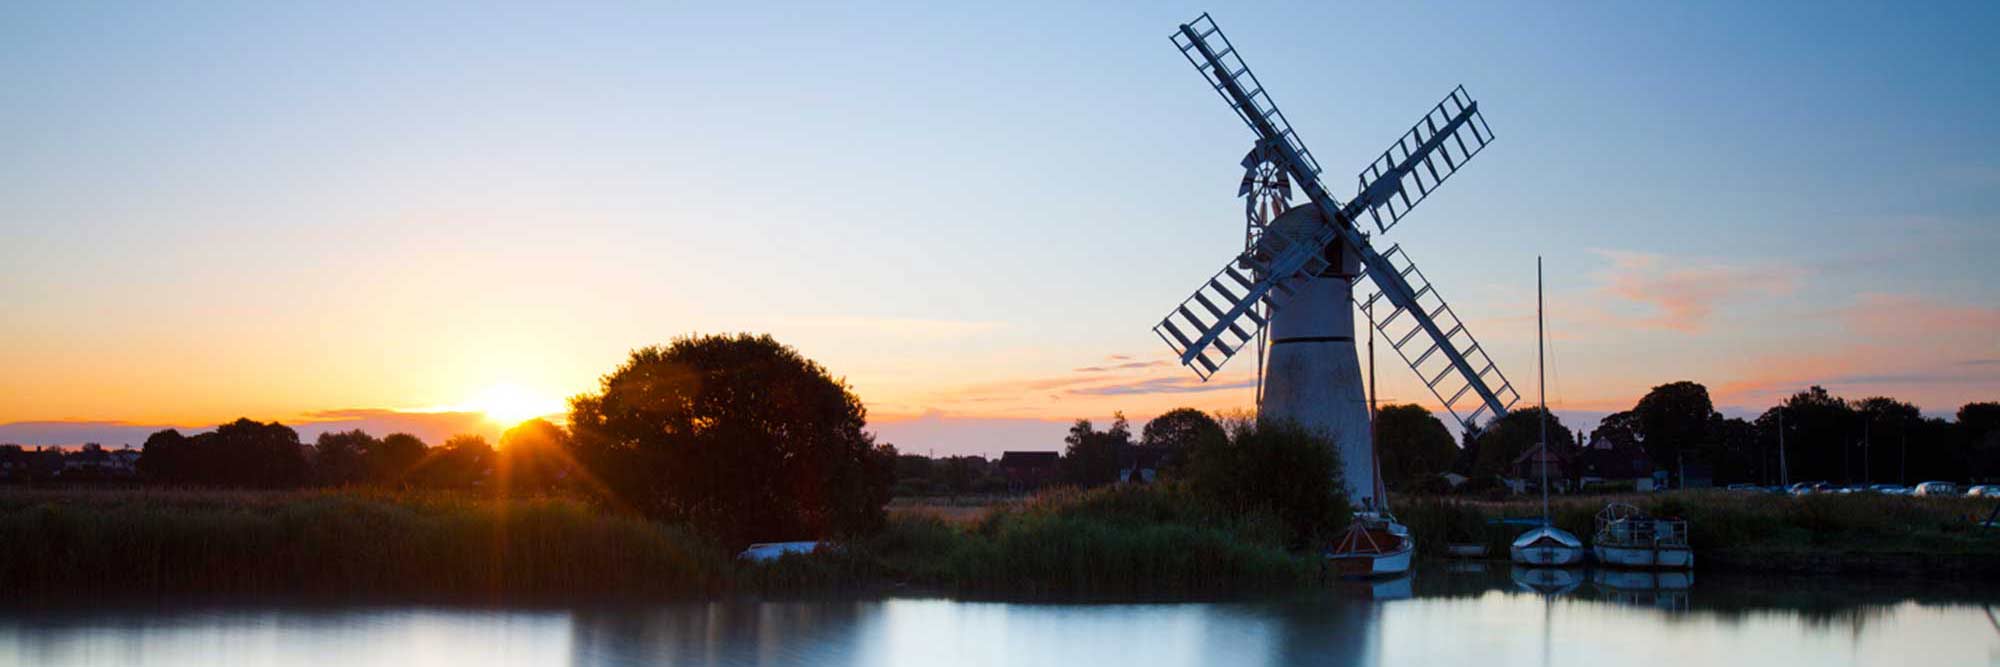 Windmill reflected in still lake with the sun setting on the horizon